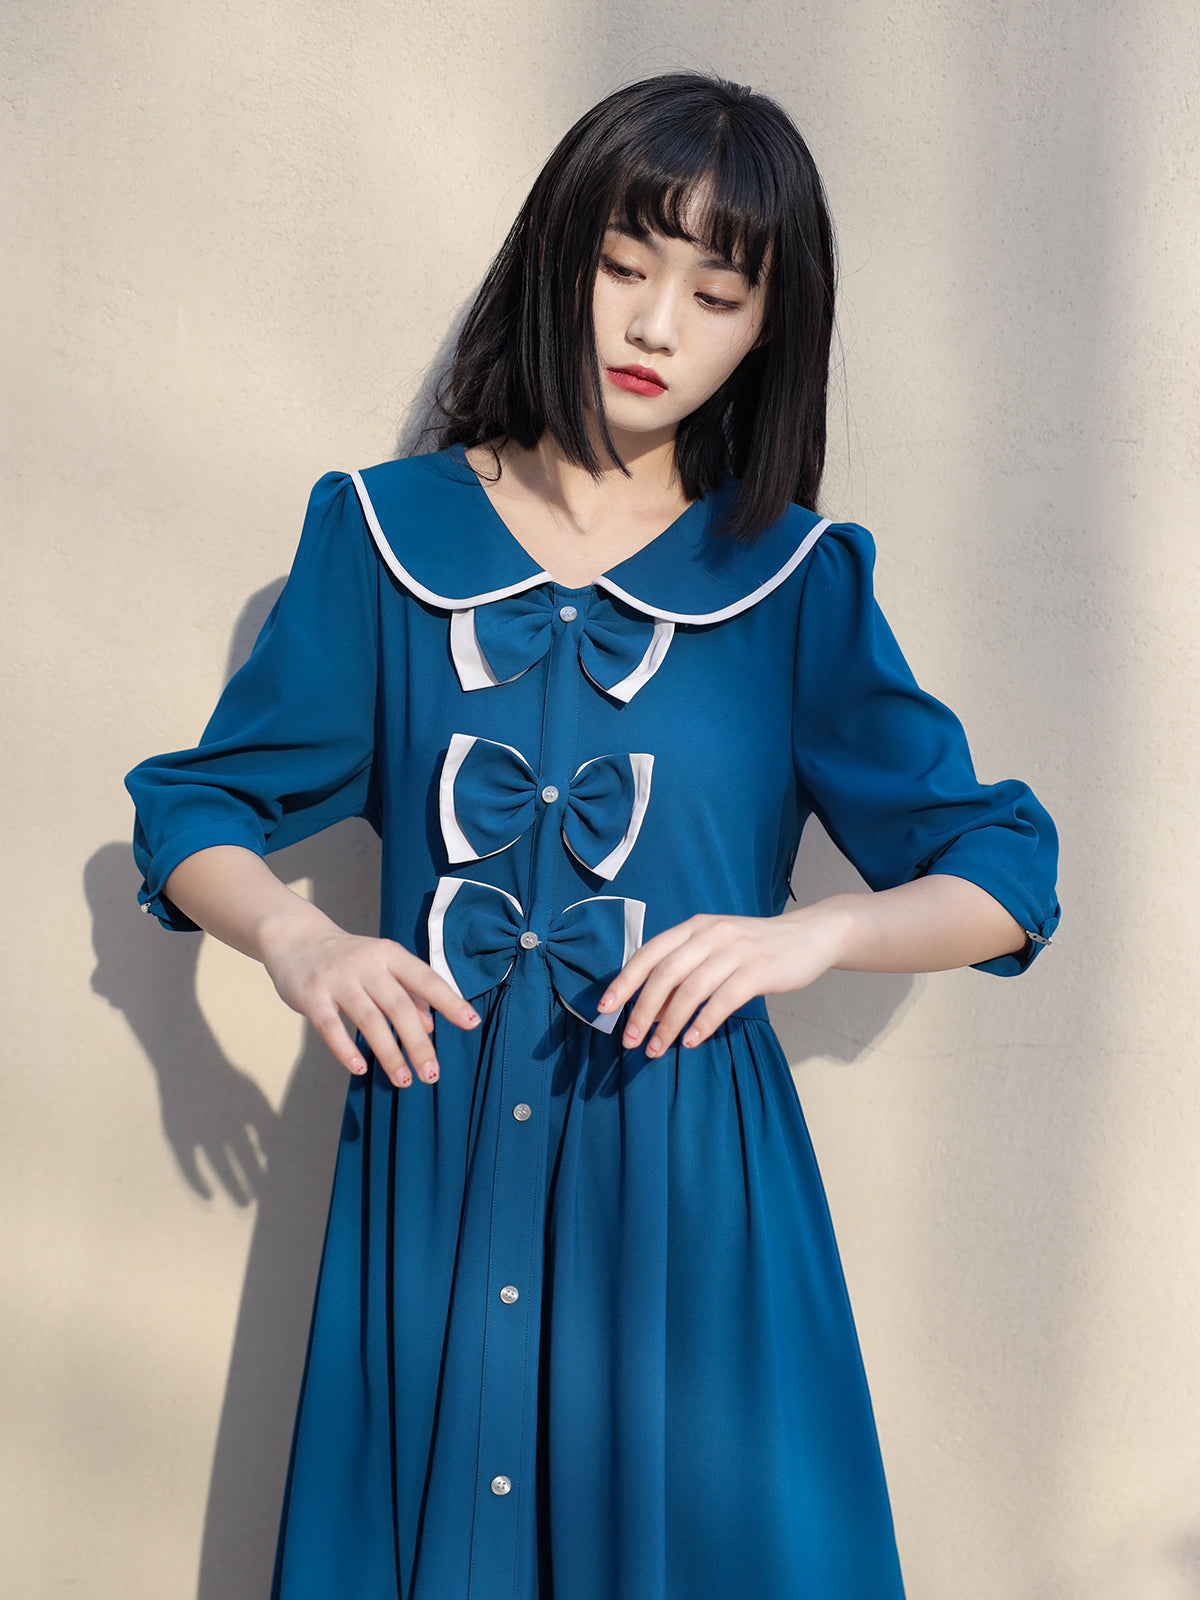 Alice-style one-piece dress with impressive double ribbon